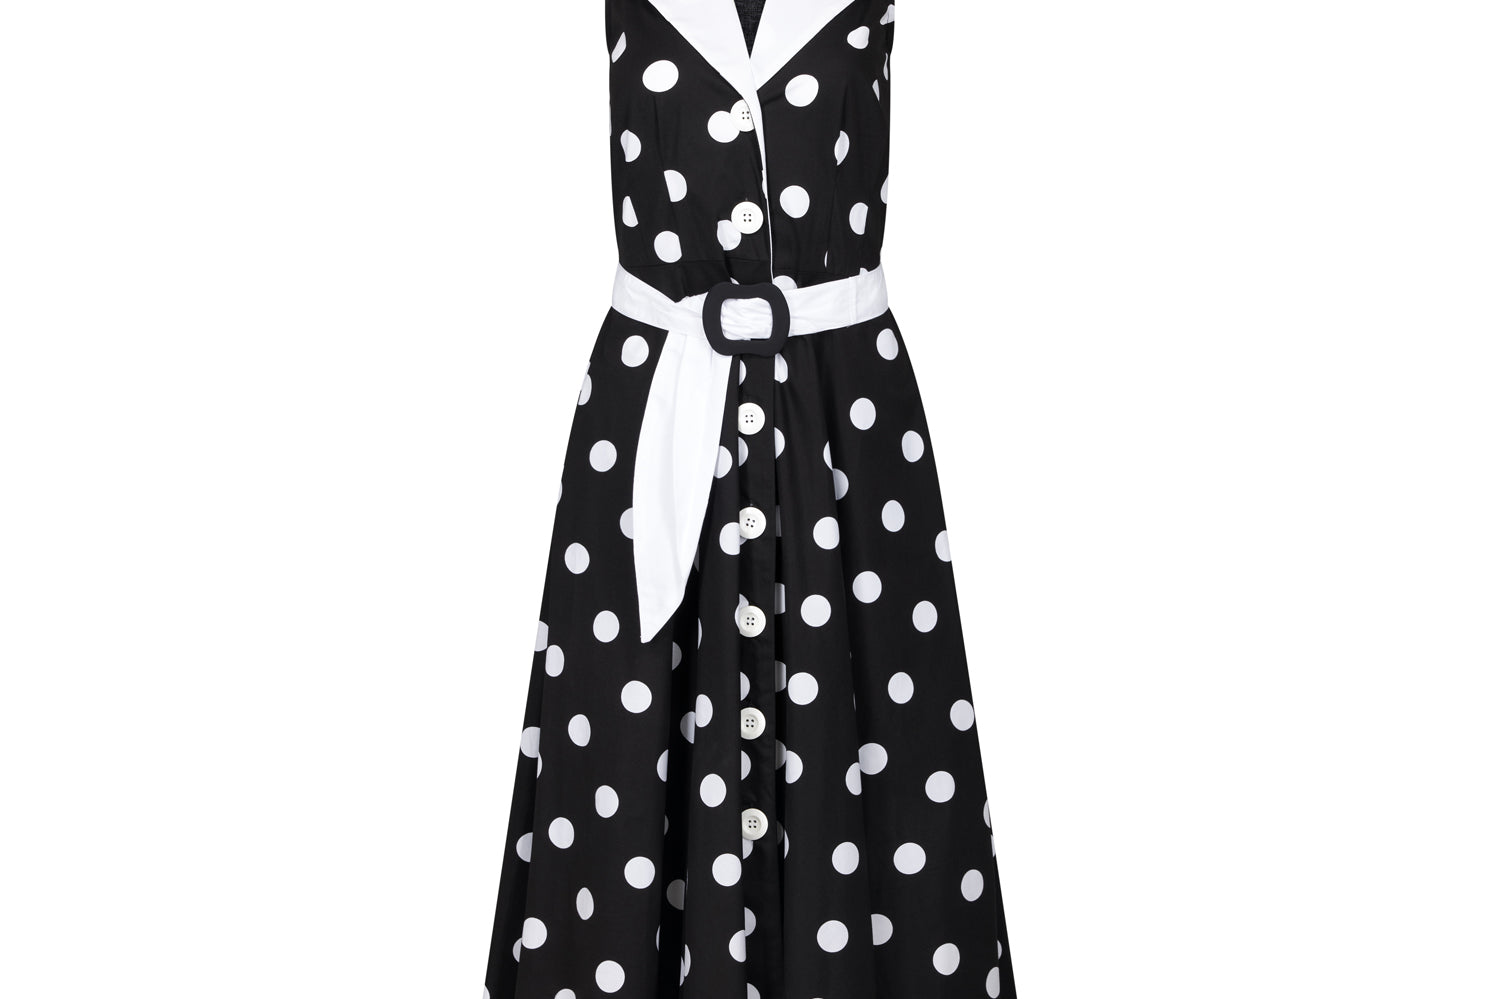 Ghost image, front view of black and white fit and flare polka dot midi dress.  Collar and belt is contrast white. 